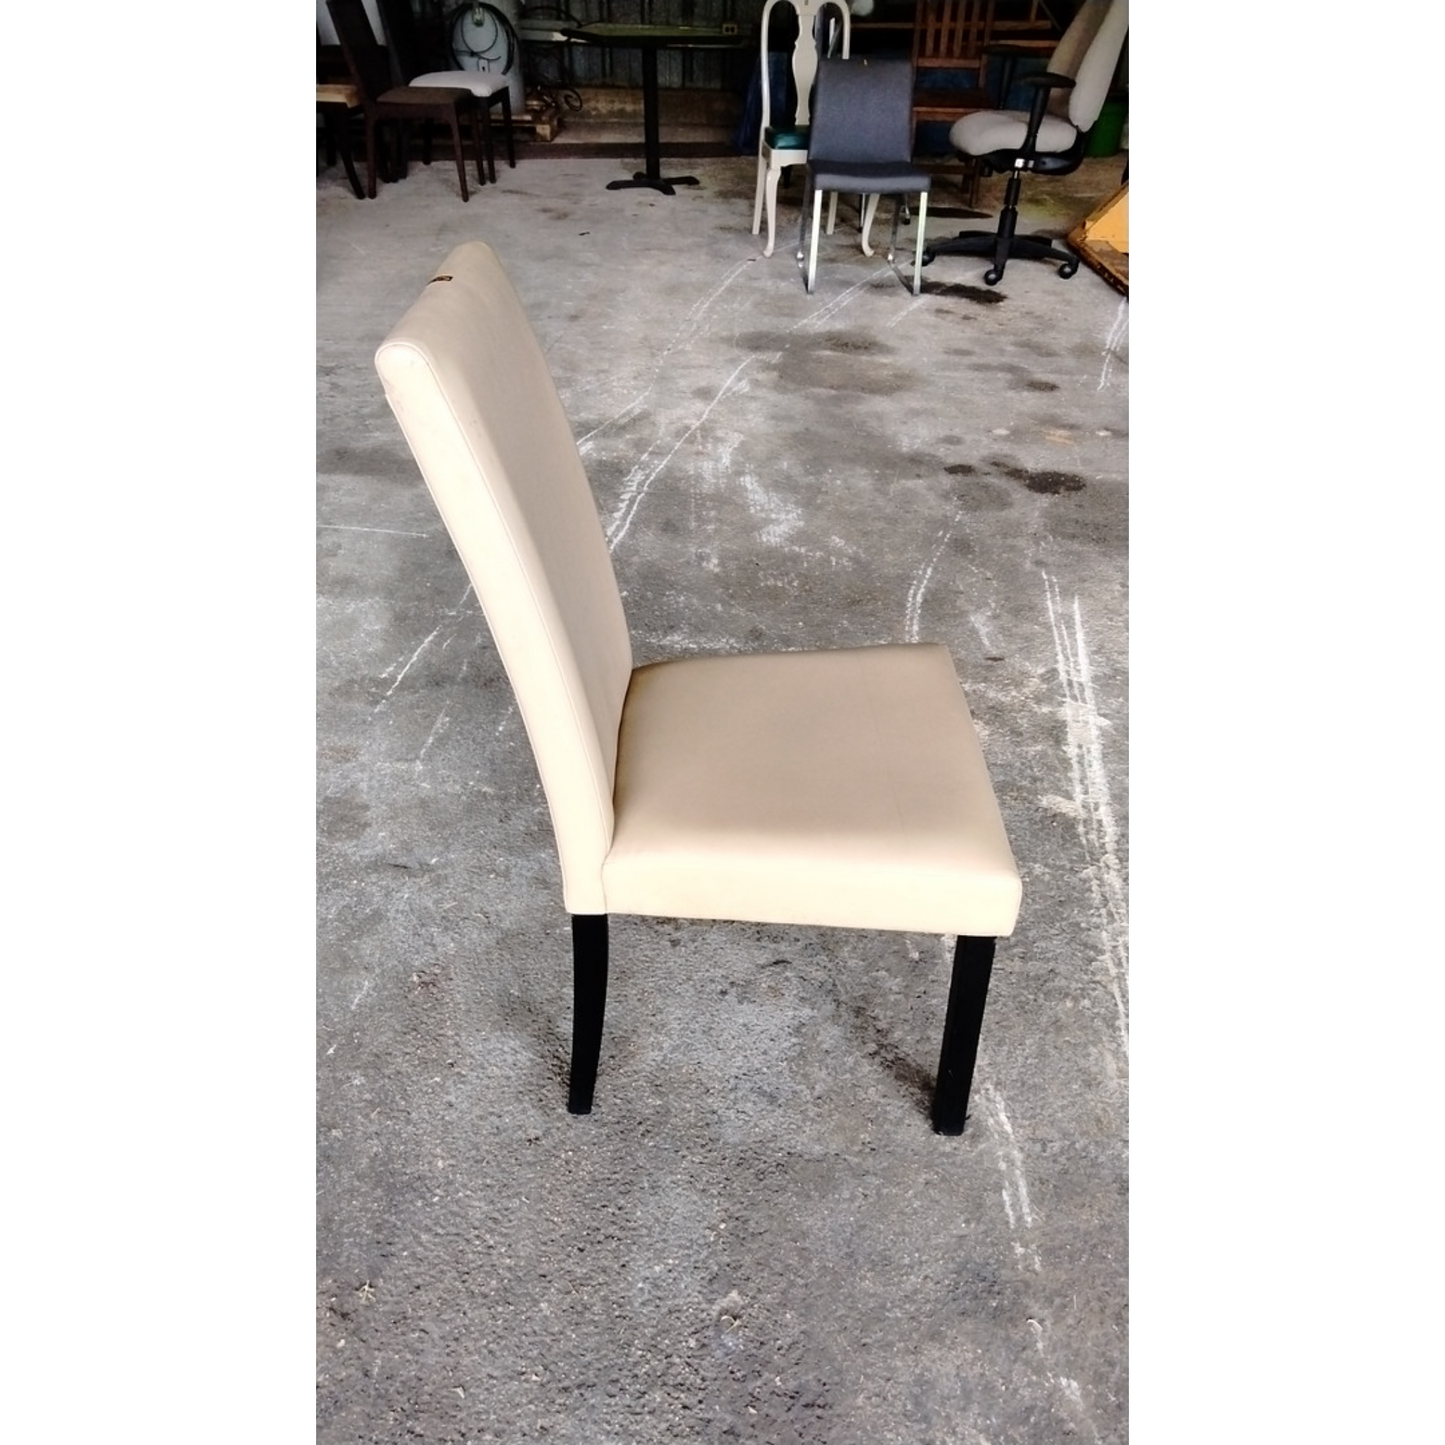 Wenge wood chair with cream vinyl upholstery (4 unit lot / Sold by lot)